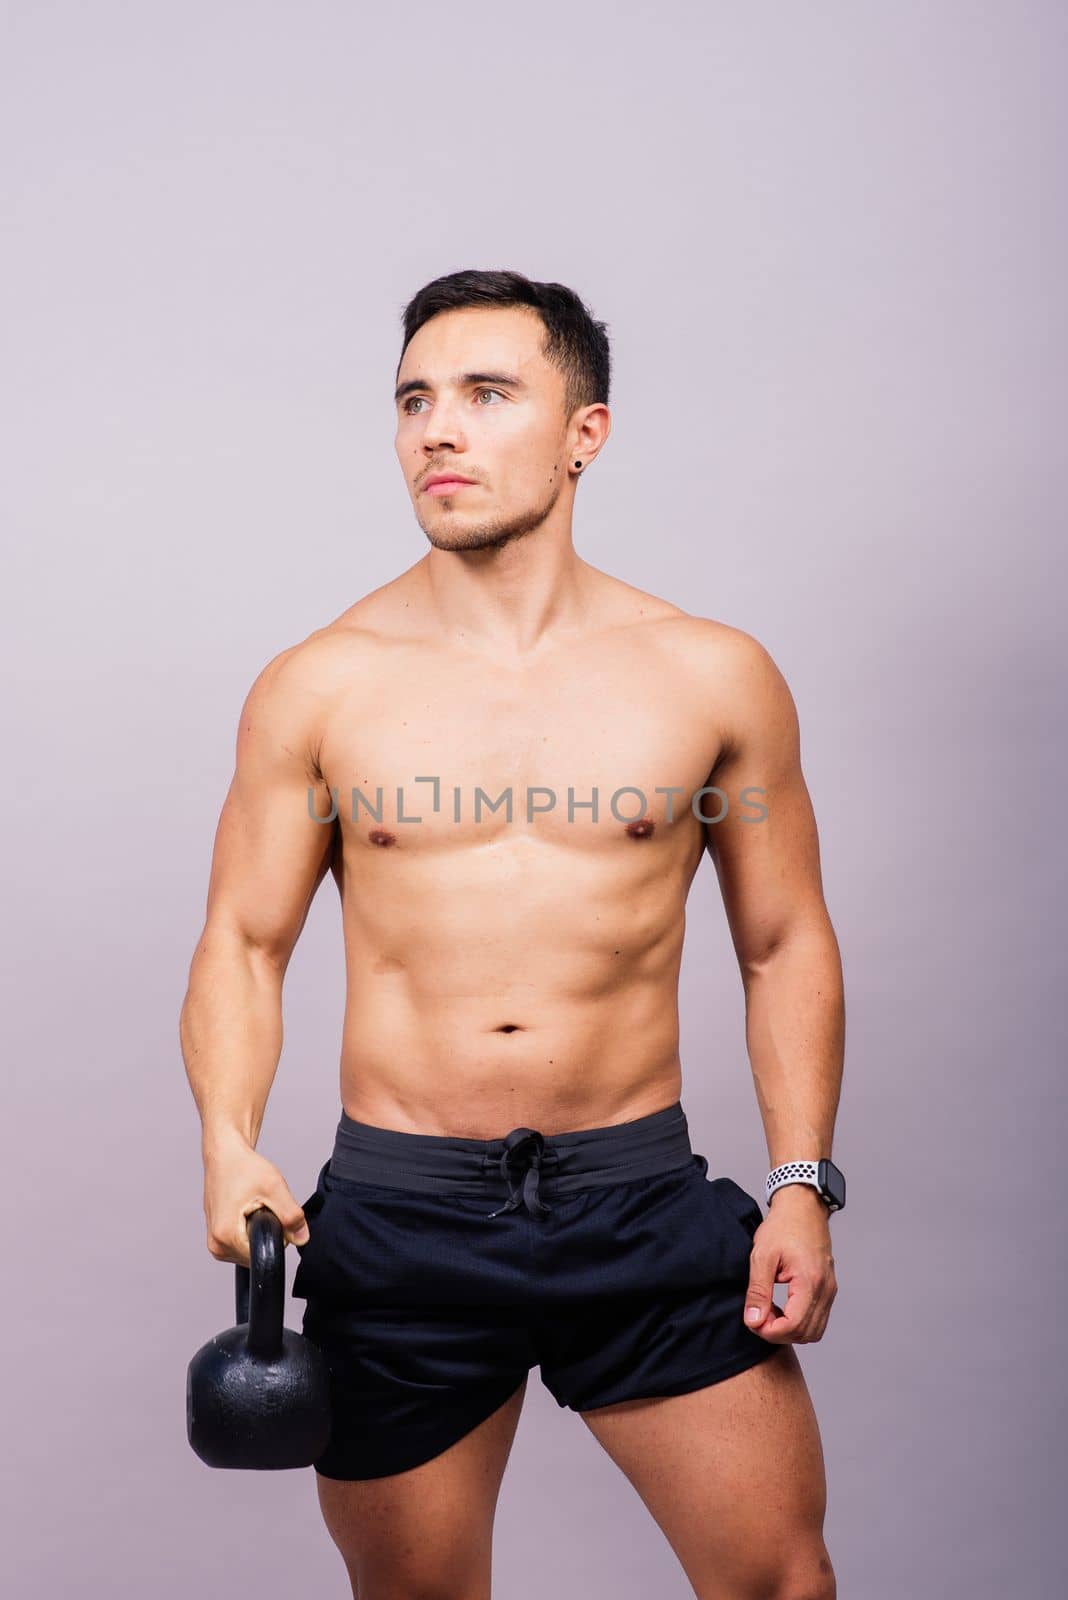 Handsome muscular man holding kettle bell with copy space. Hispanic male athlete by Zelenin